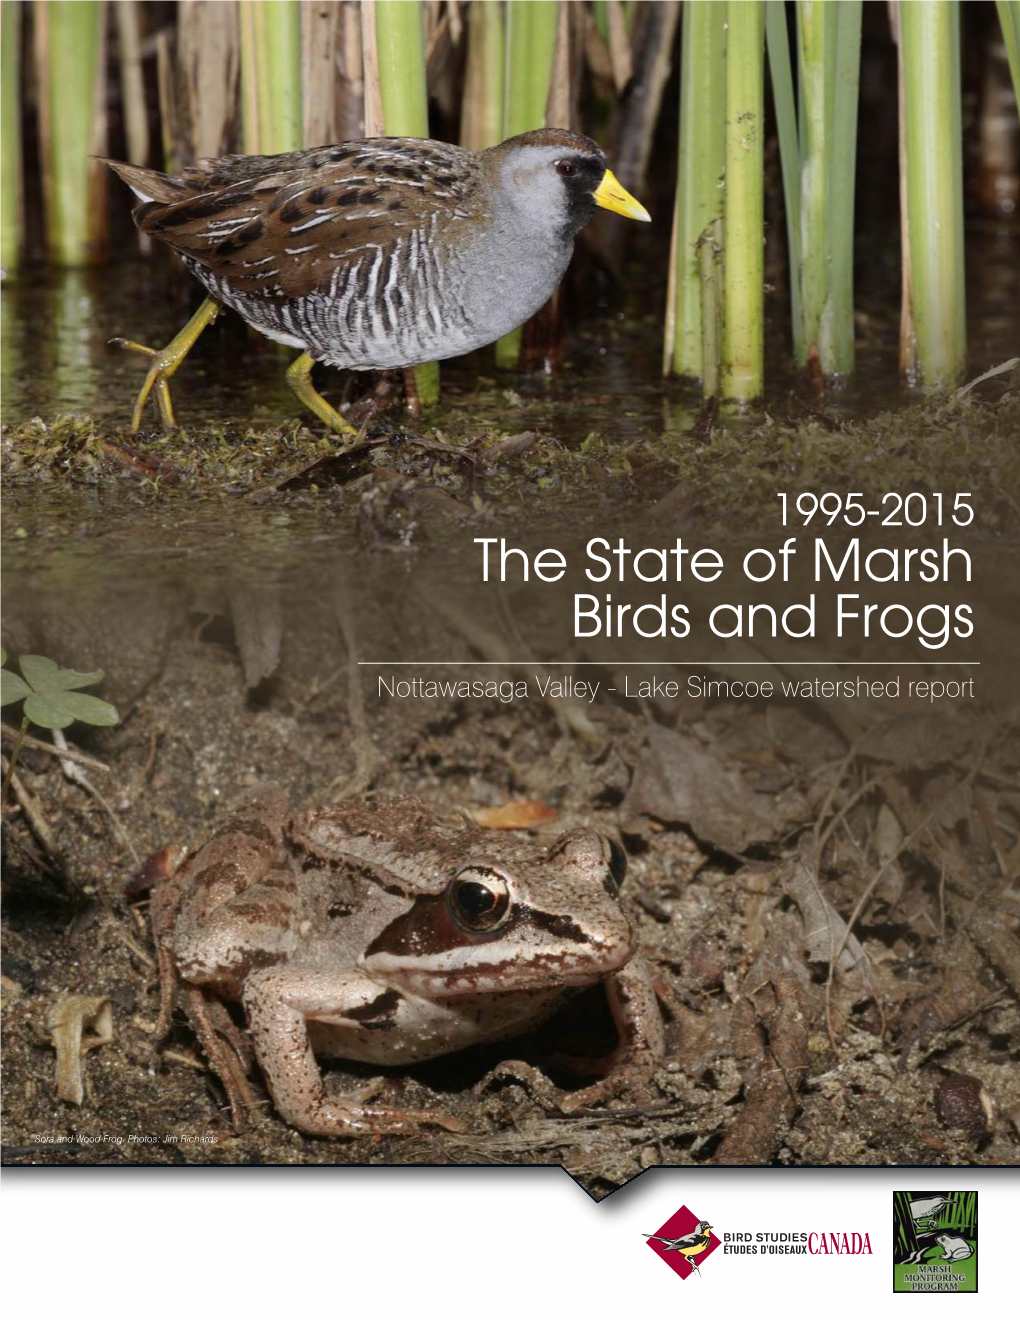 The State of Marsh Birds and Frogs Nottawasaga Valley - Lake Simcoe Watershed Report